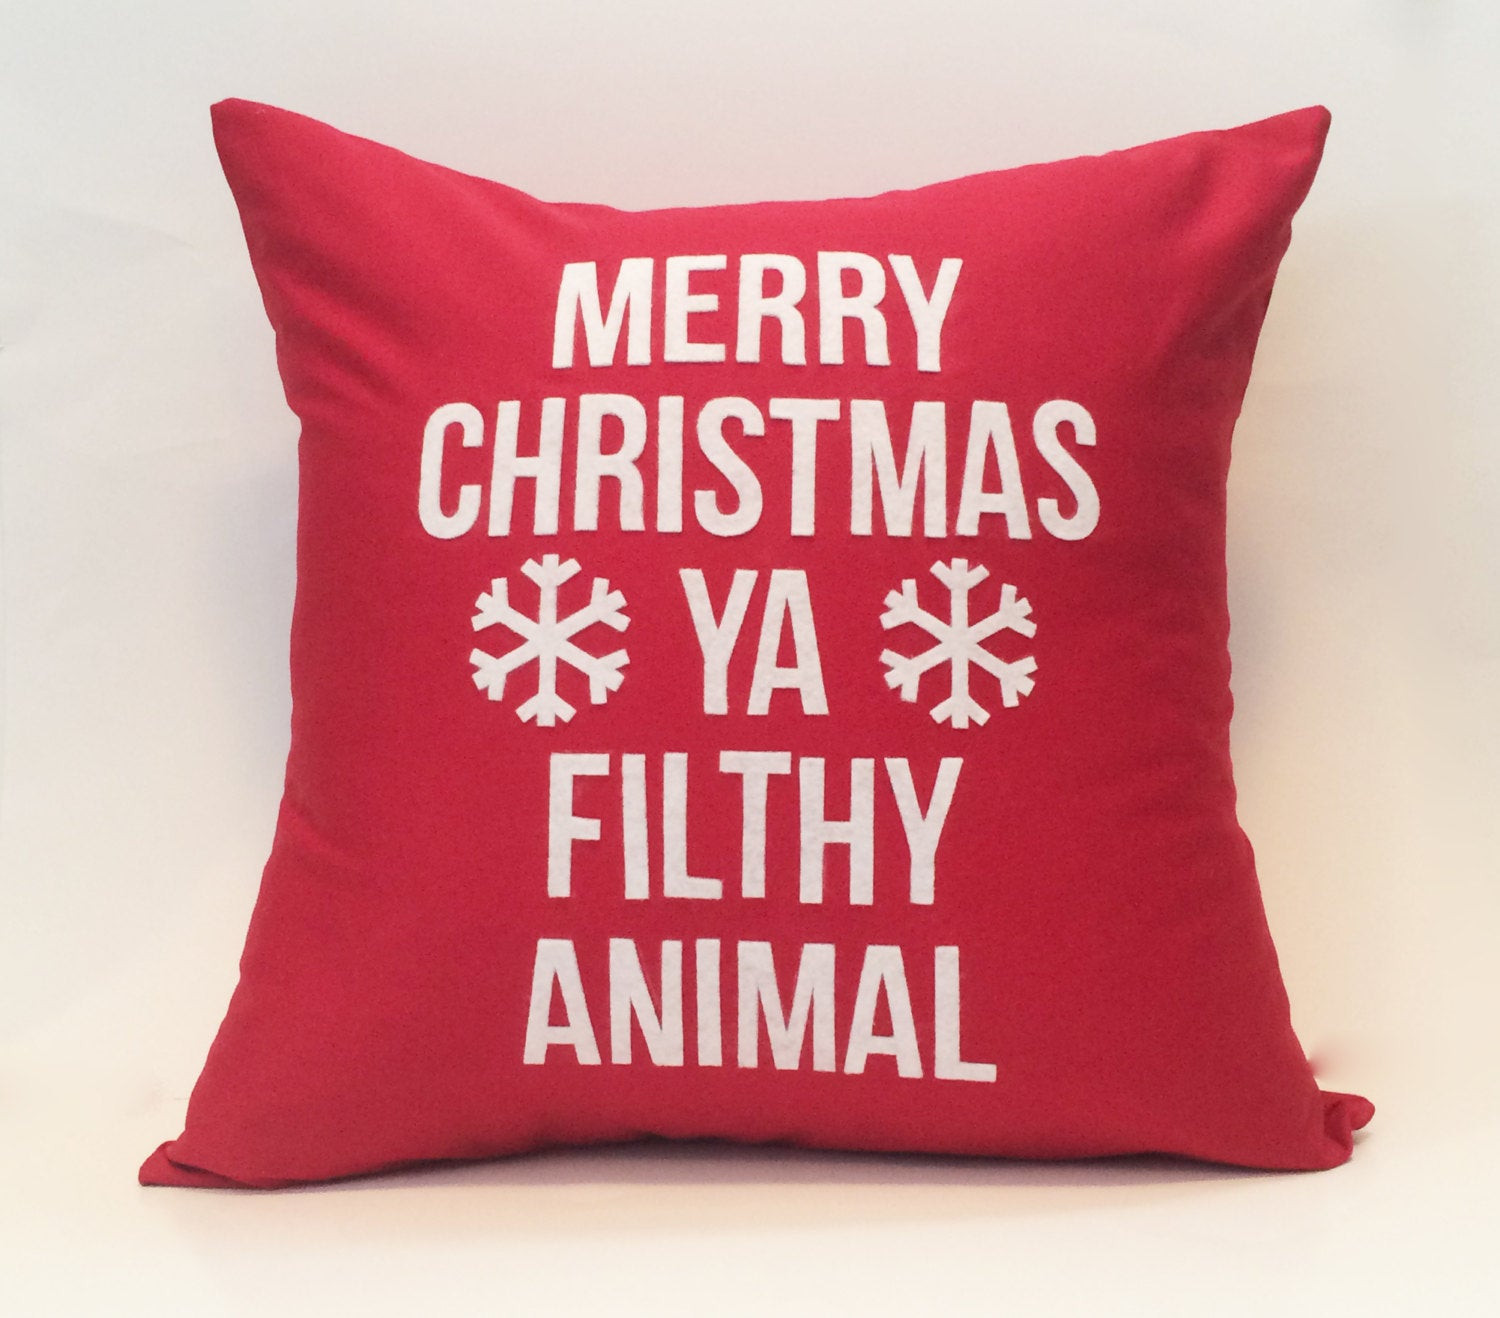 Merry Christmas Ya Filthy Animal Quote
 18X18 Merry Christmas Ya Filthy Animal Home